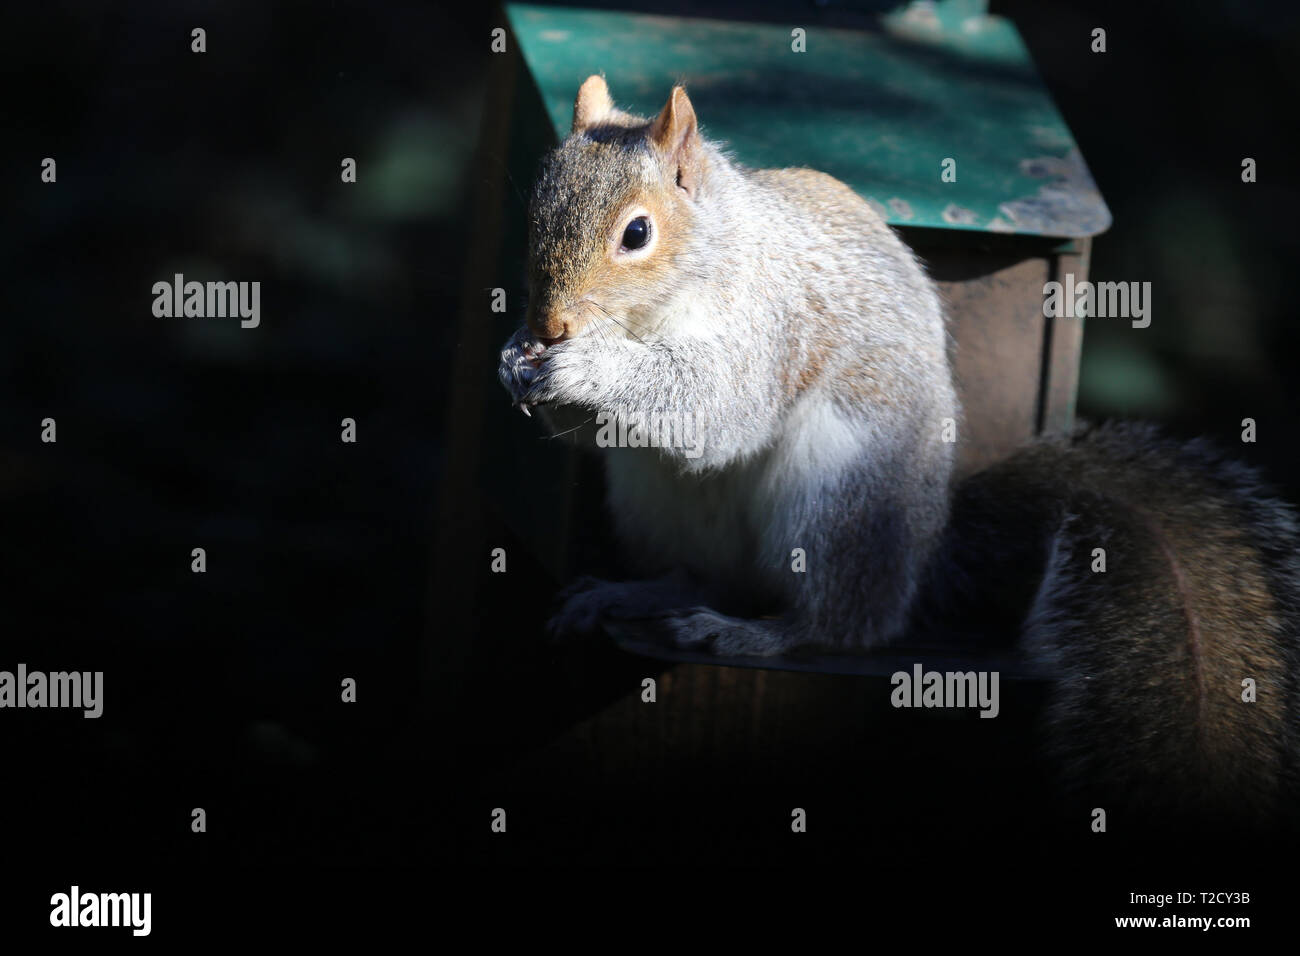 Portrait of a Grey Squirrel Nibbling a Nut Stock Photo